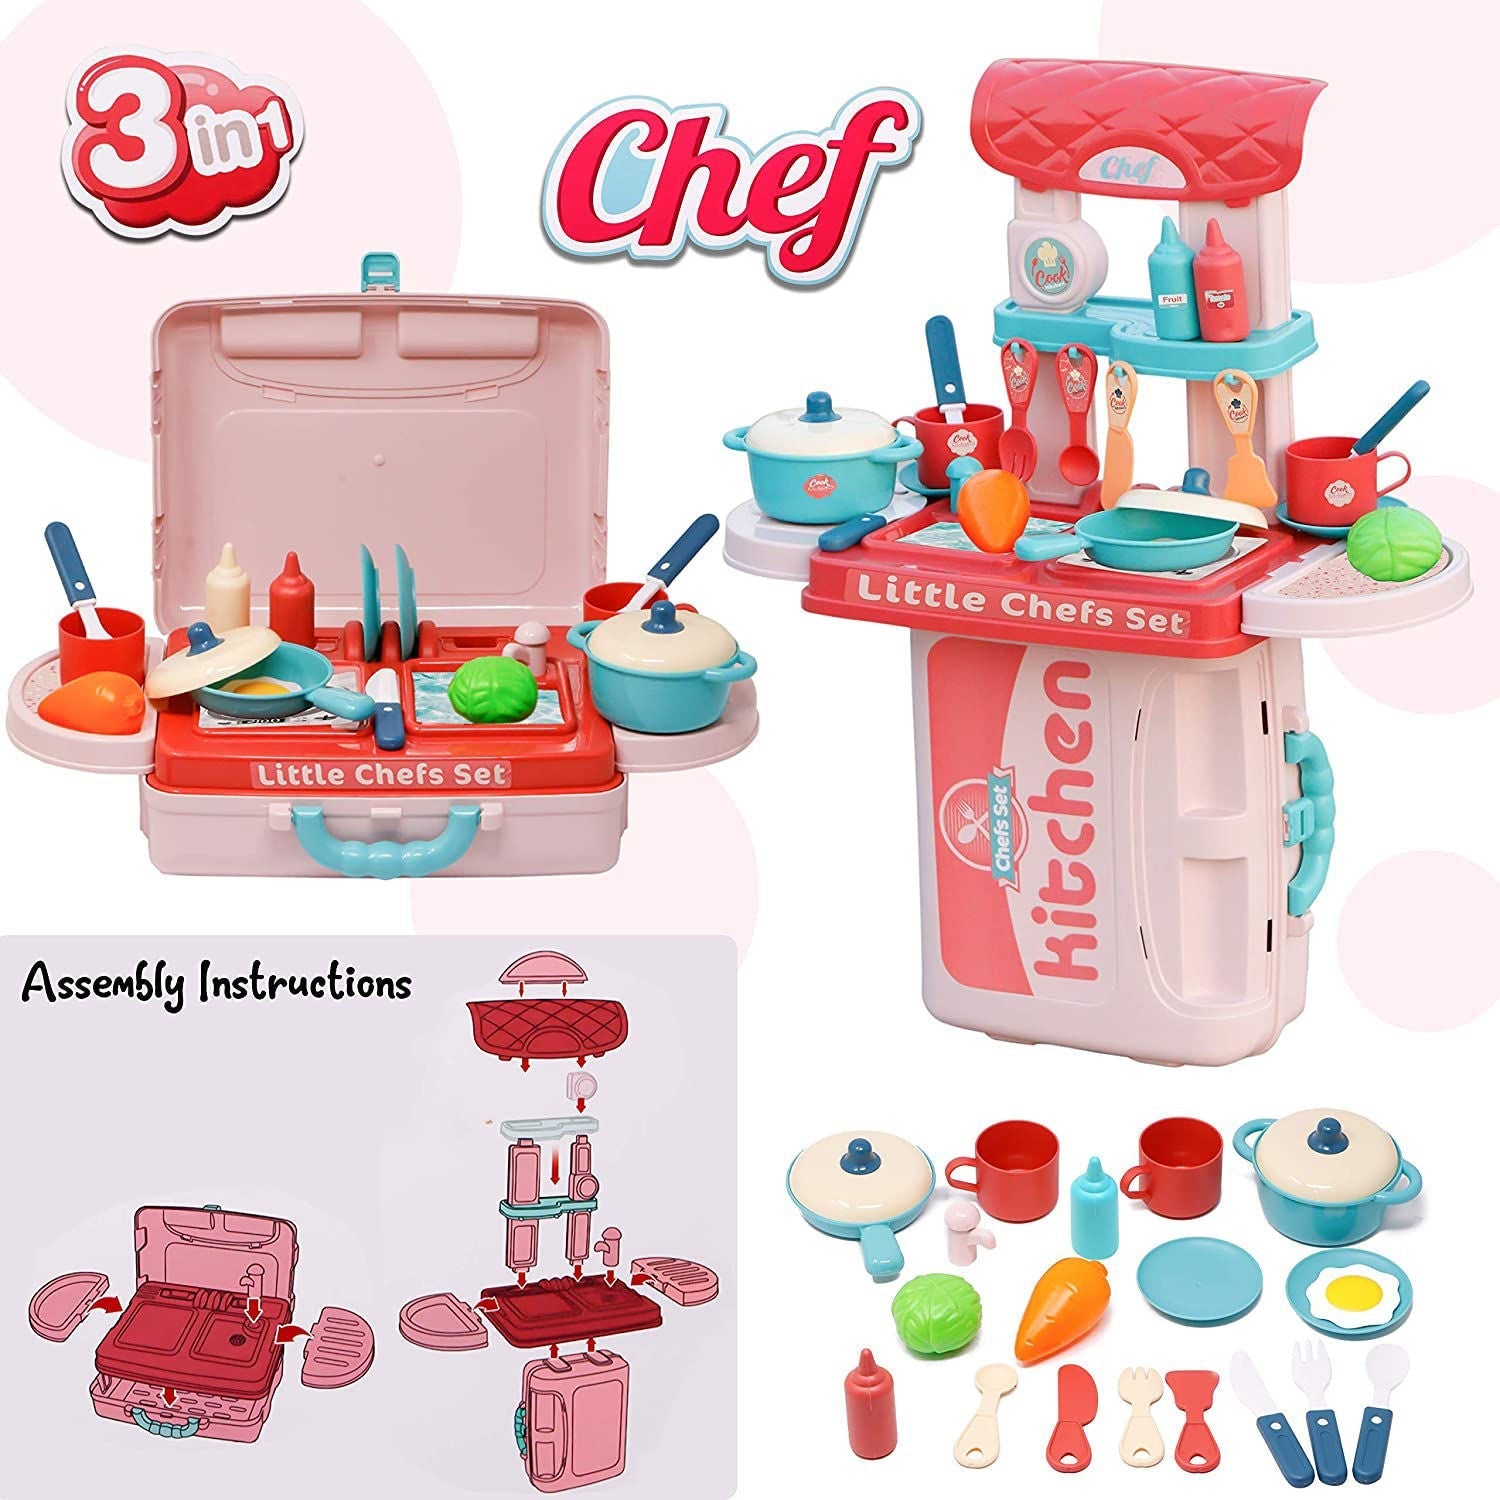 3916 Kitchen Cooking Set used in all kinds of household and official places specially for kids and children for their playing and enjoying purposes.